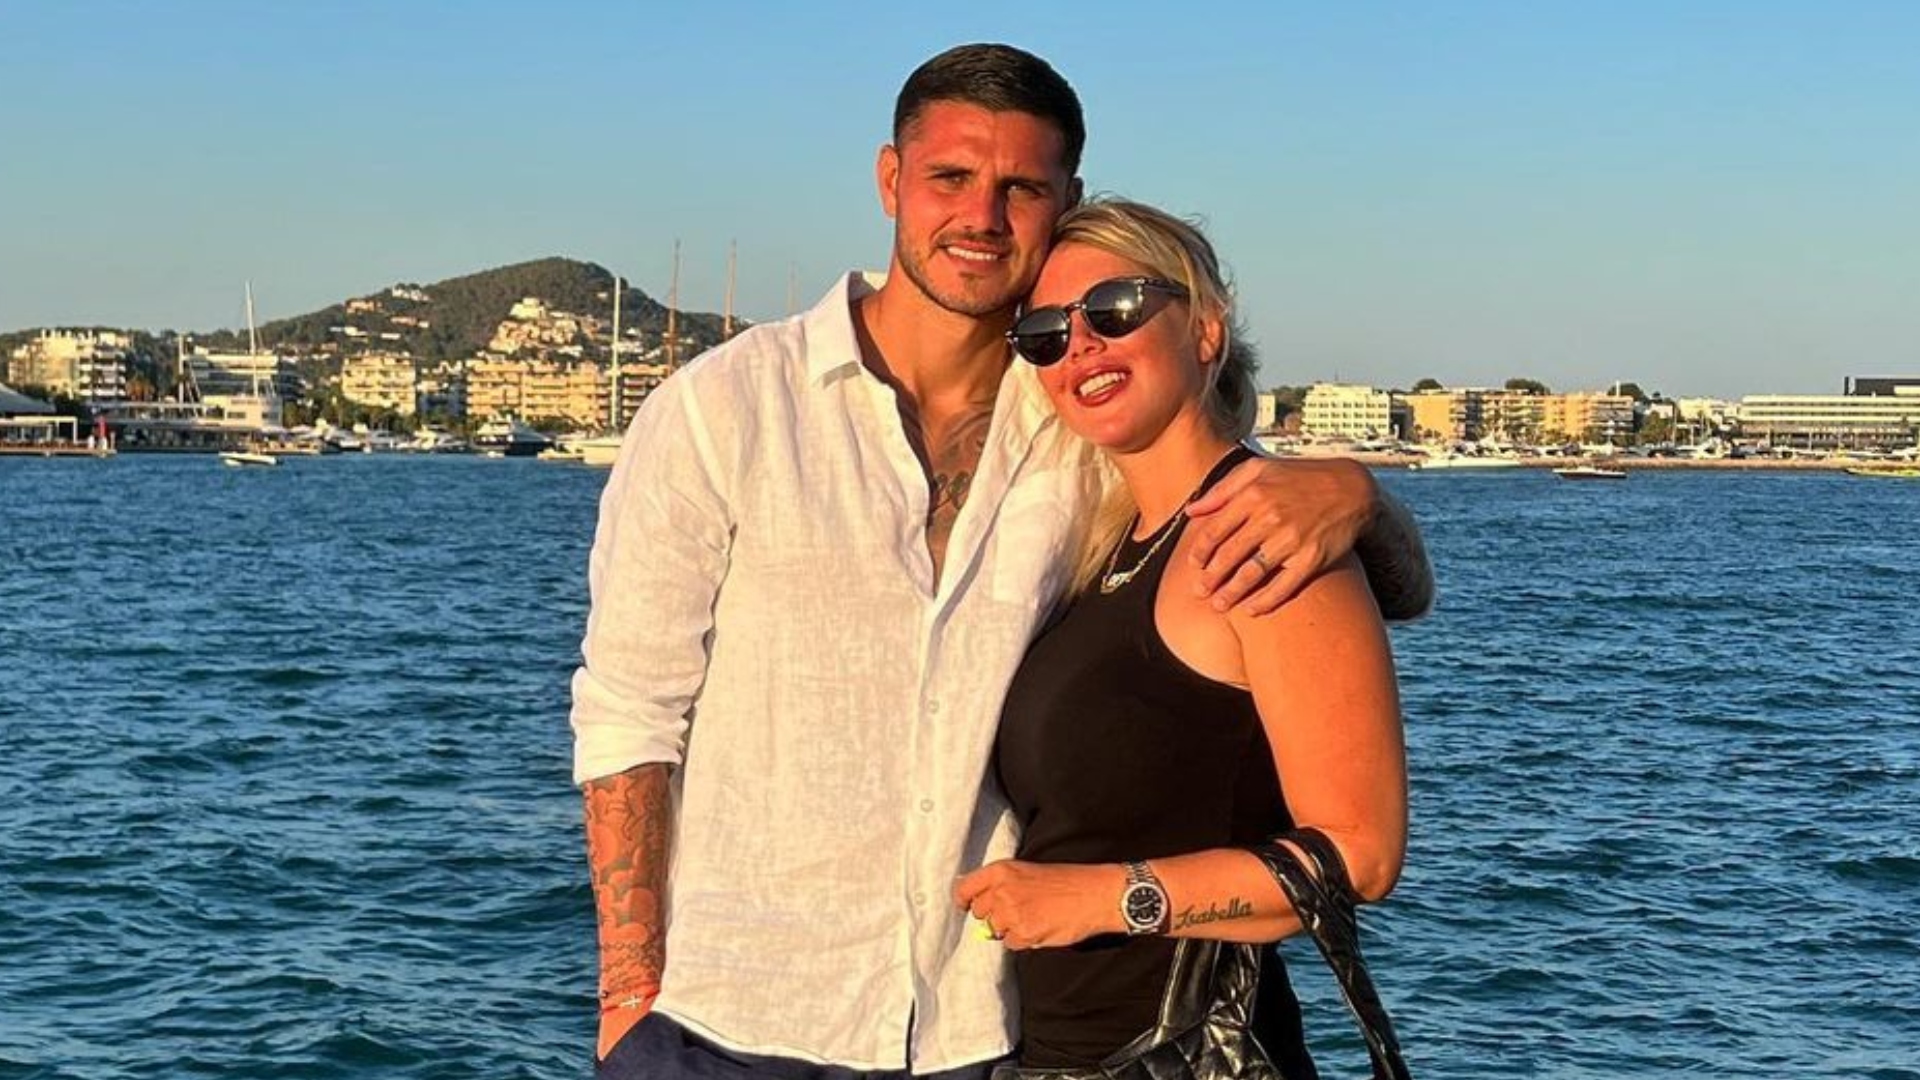 Mauro Icardi And Wanda Nara, A Couple Who Ended After Eight Years Of Marriage